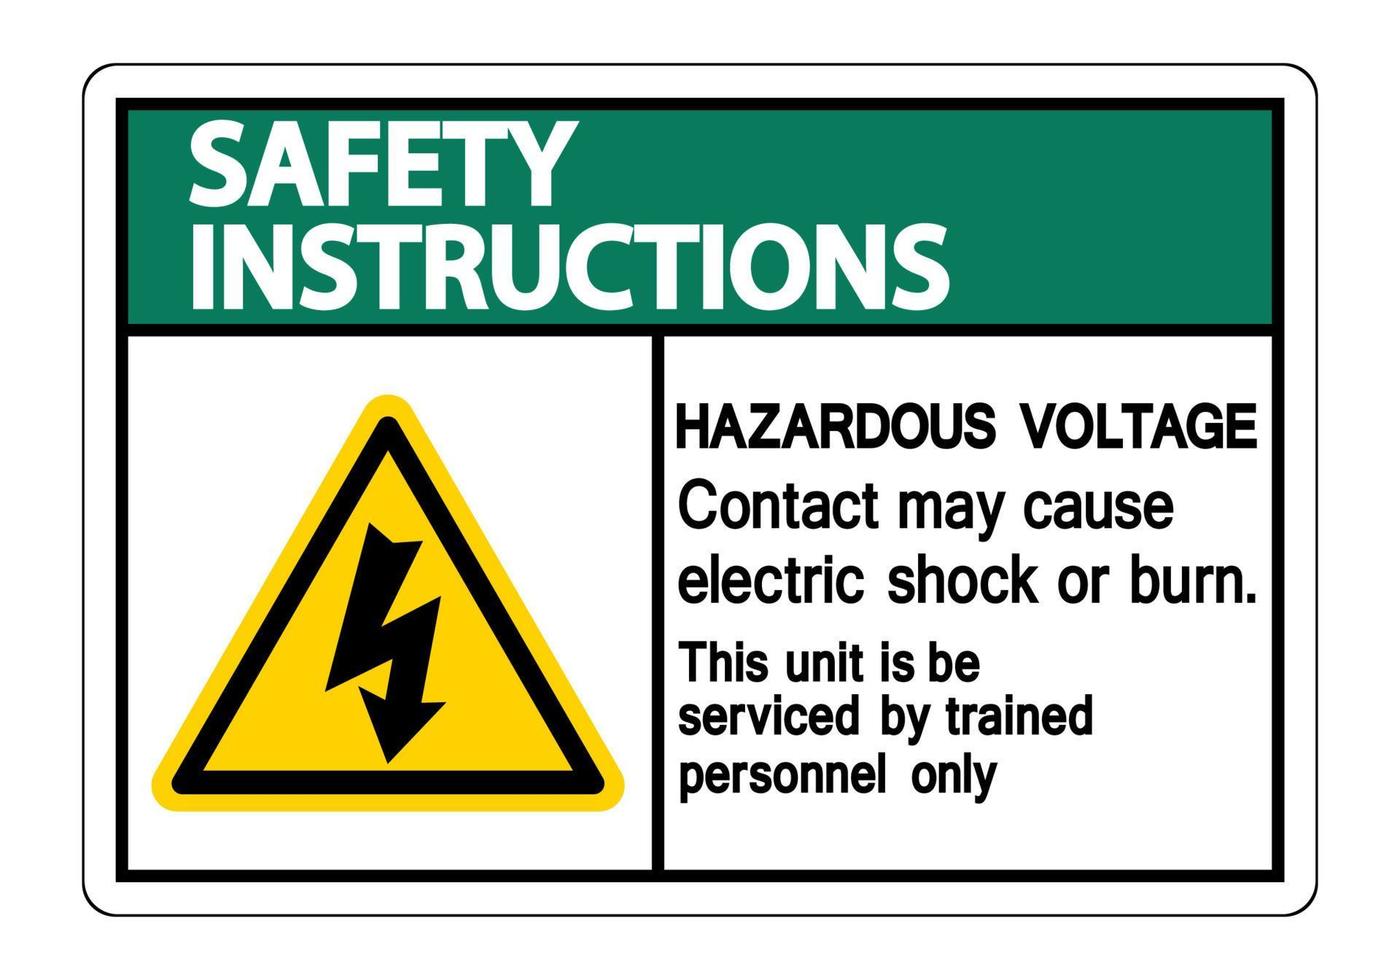 Safety instructions Hazardous Voltage Contact May Cause Electric Shock Or Burn Sign On White Background vector